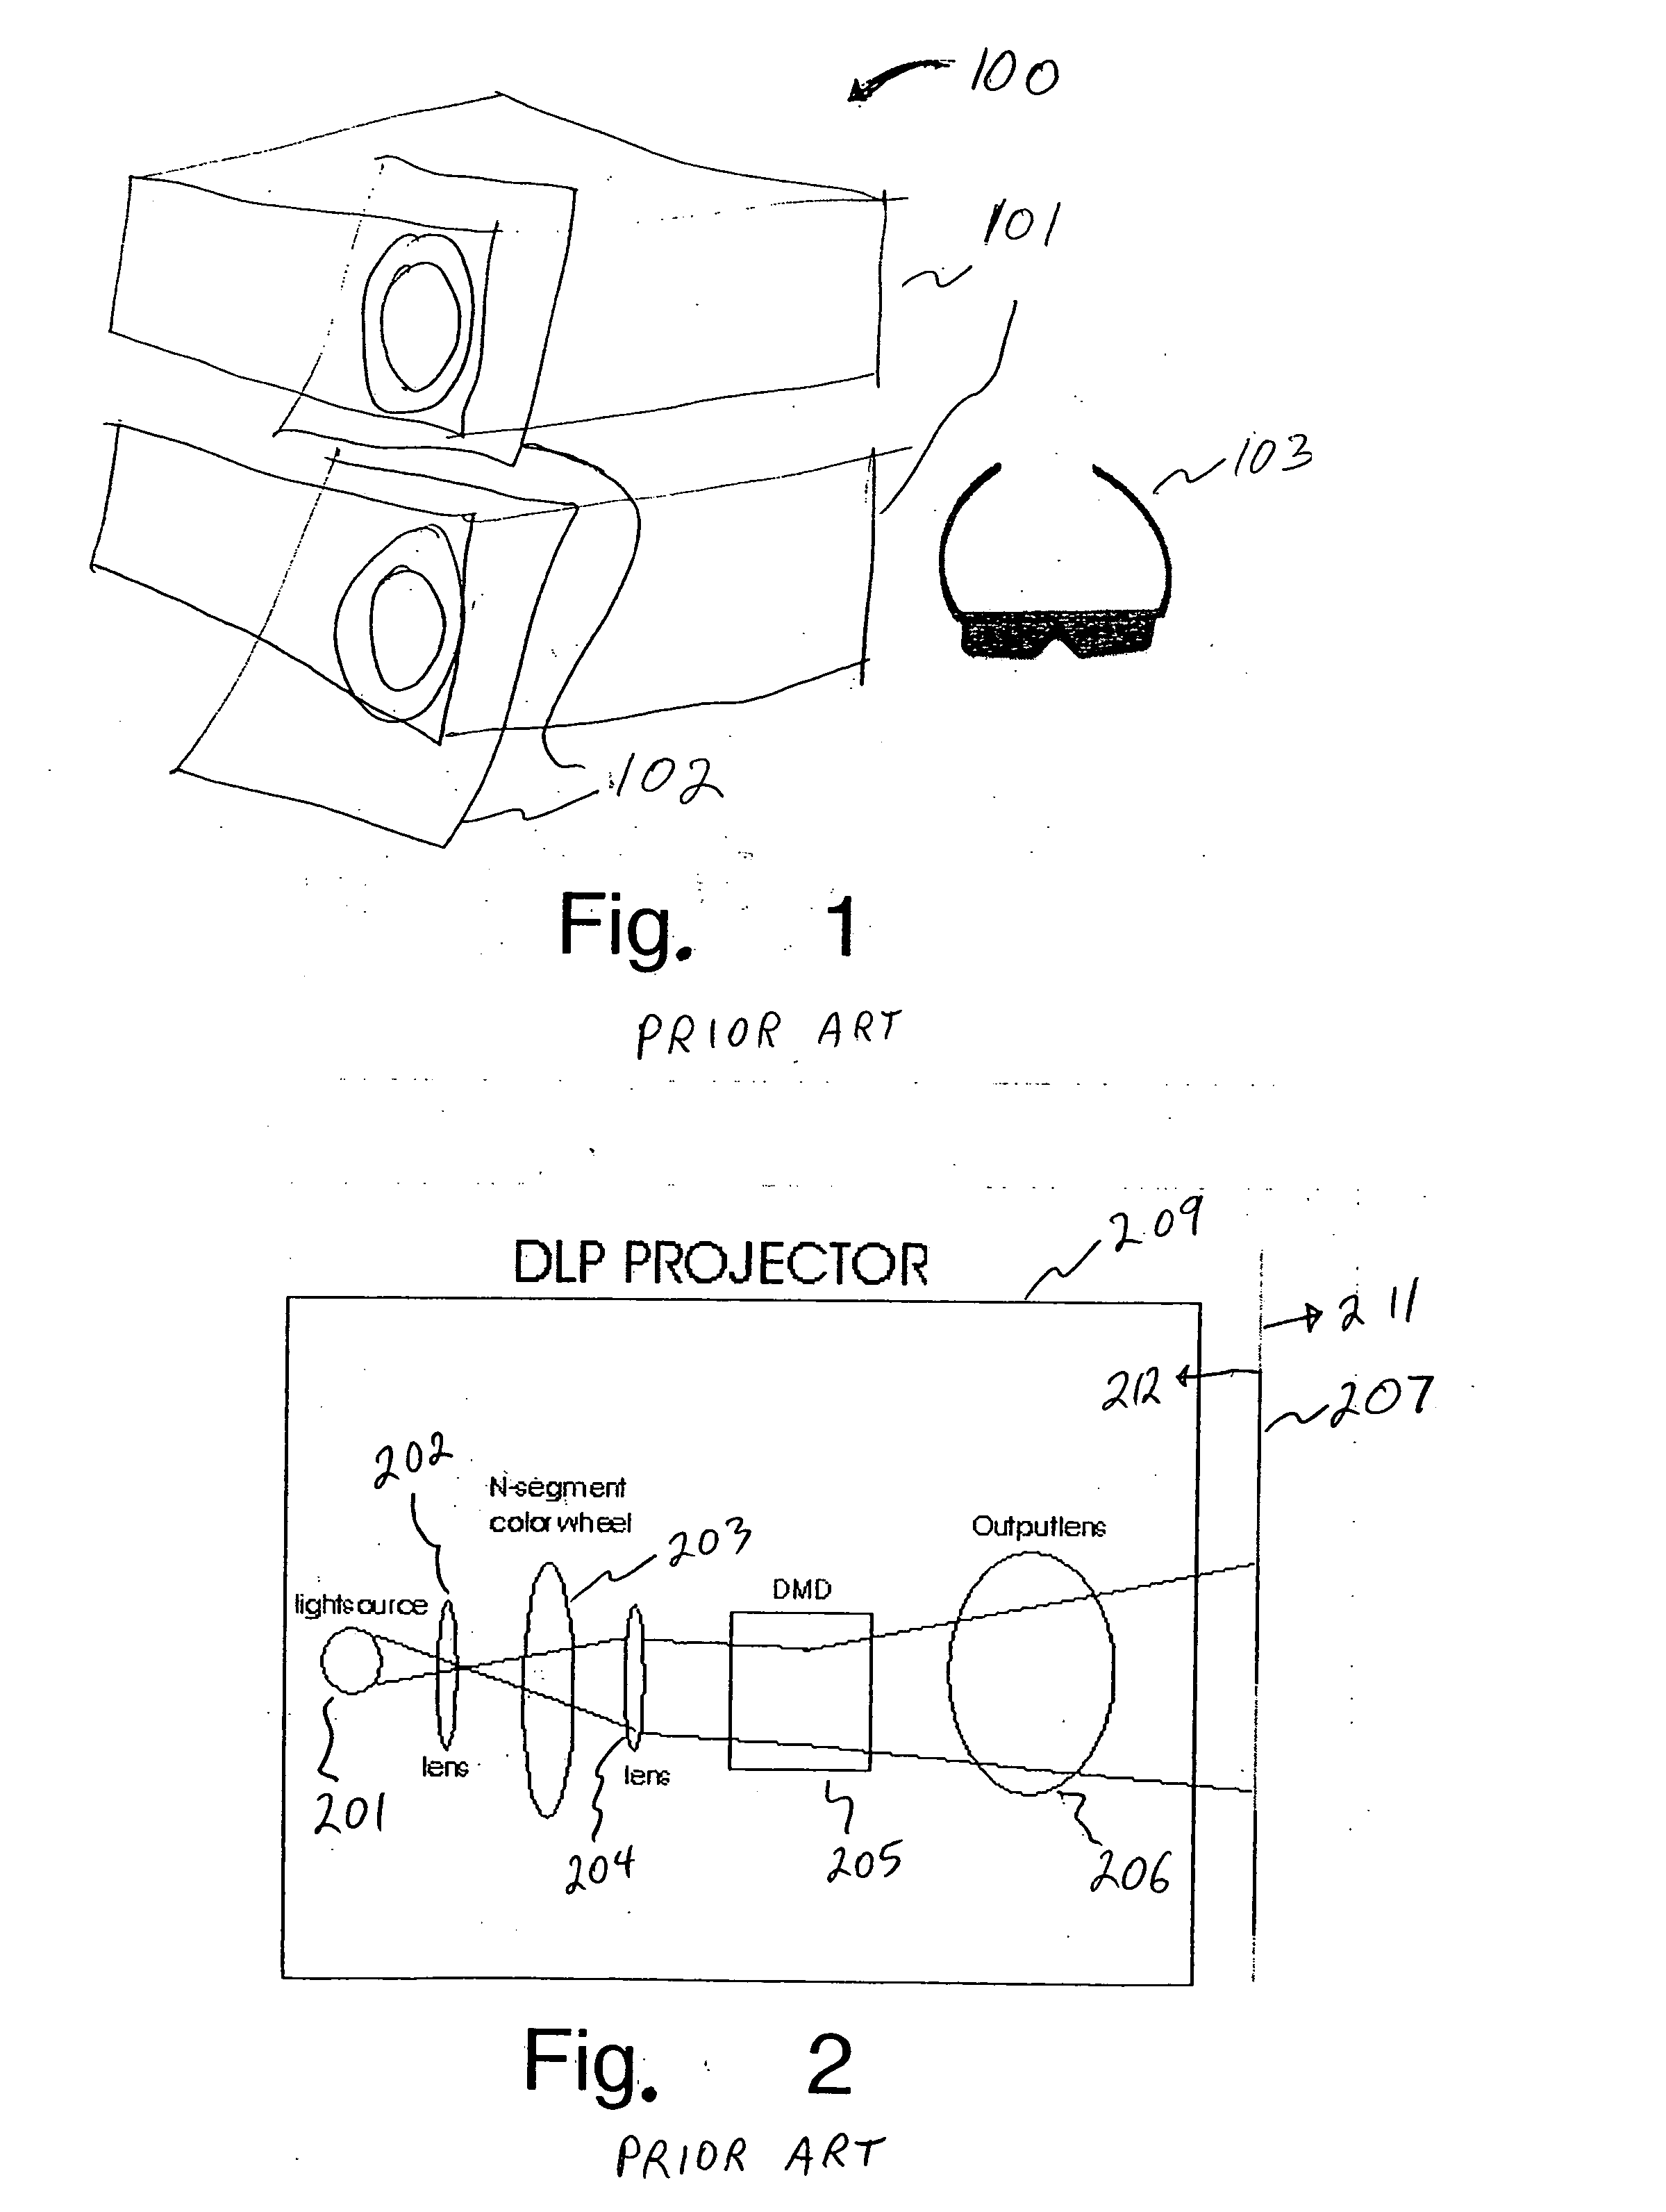 Method to synchronize stereographic hardware to sequential color rendering apparatus